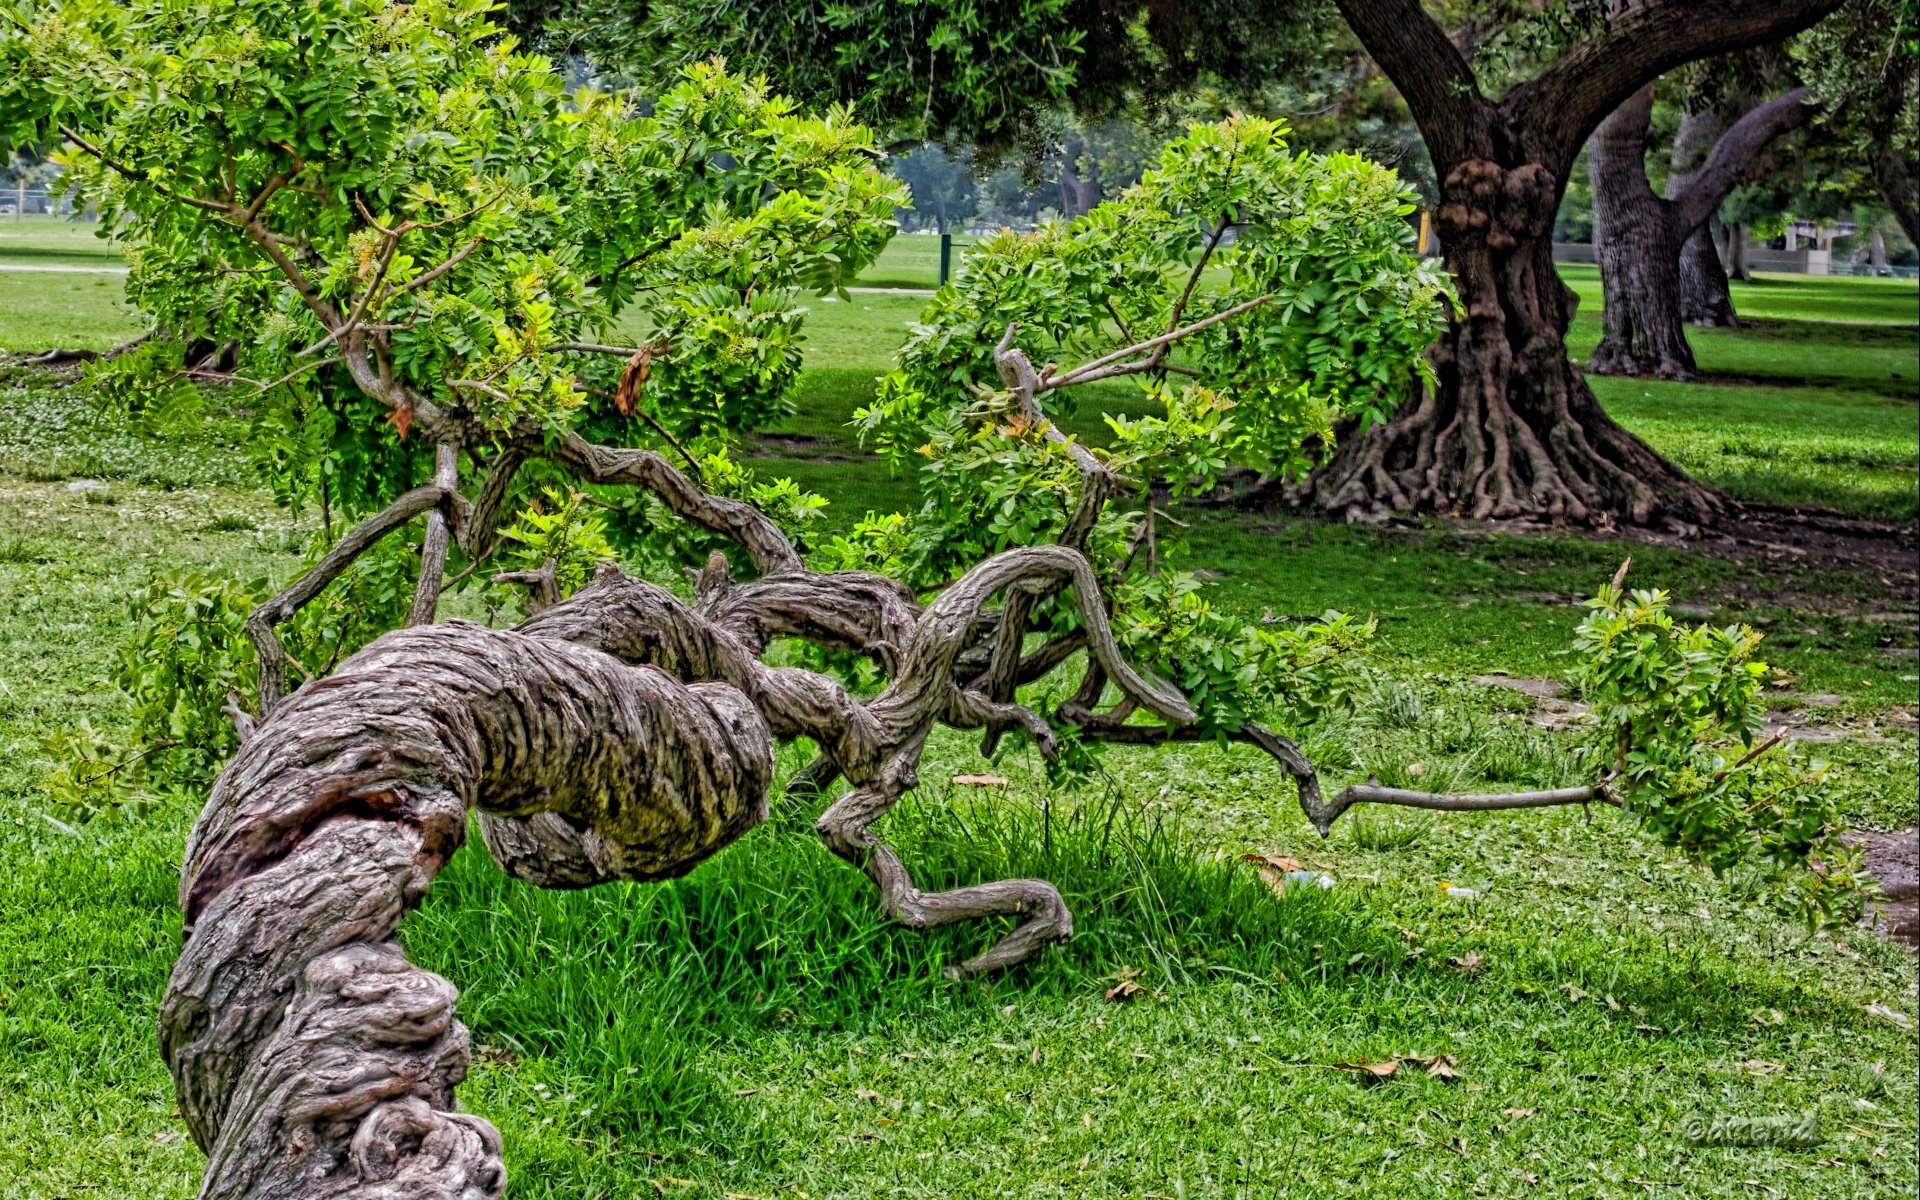 Twisted Tree Computer Wallpapers, Desktop Backgrounds | 1920x1200 | ID